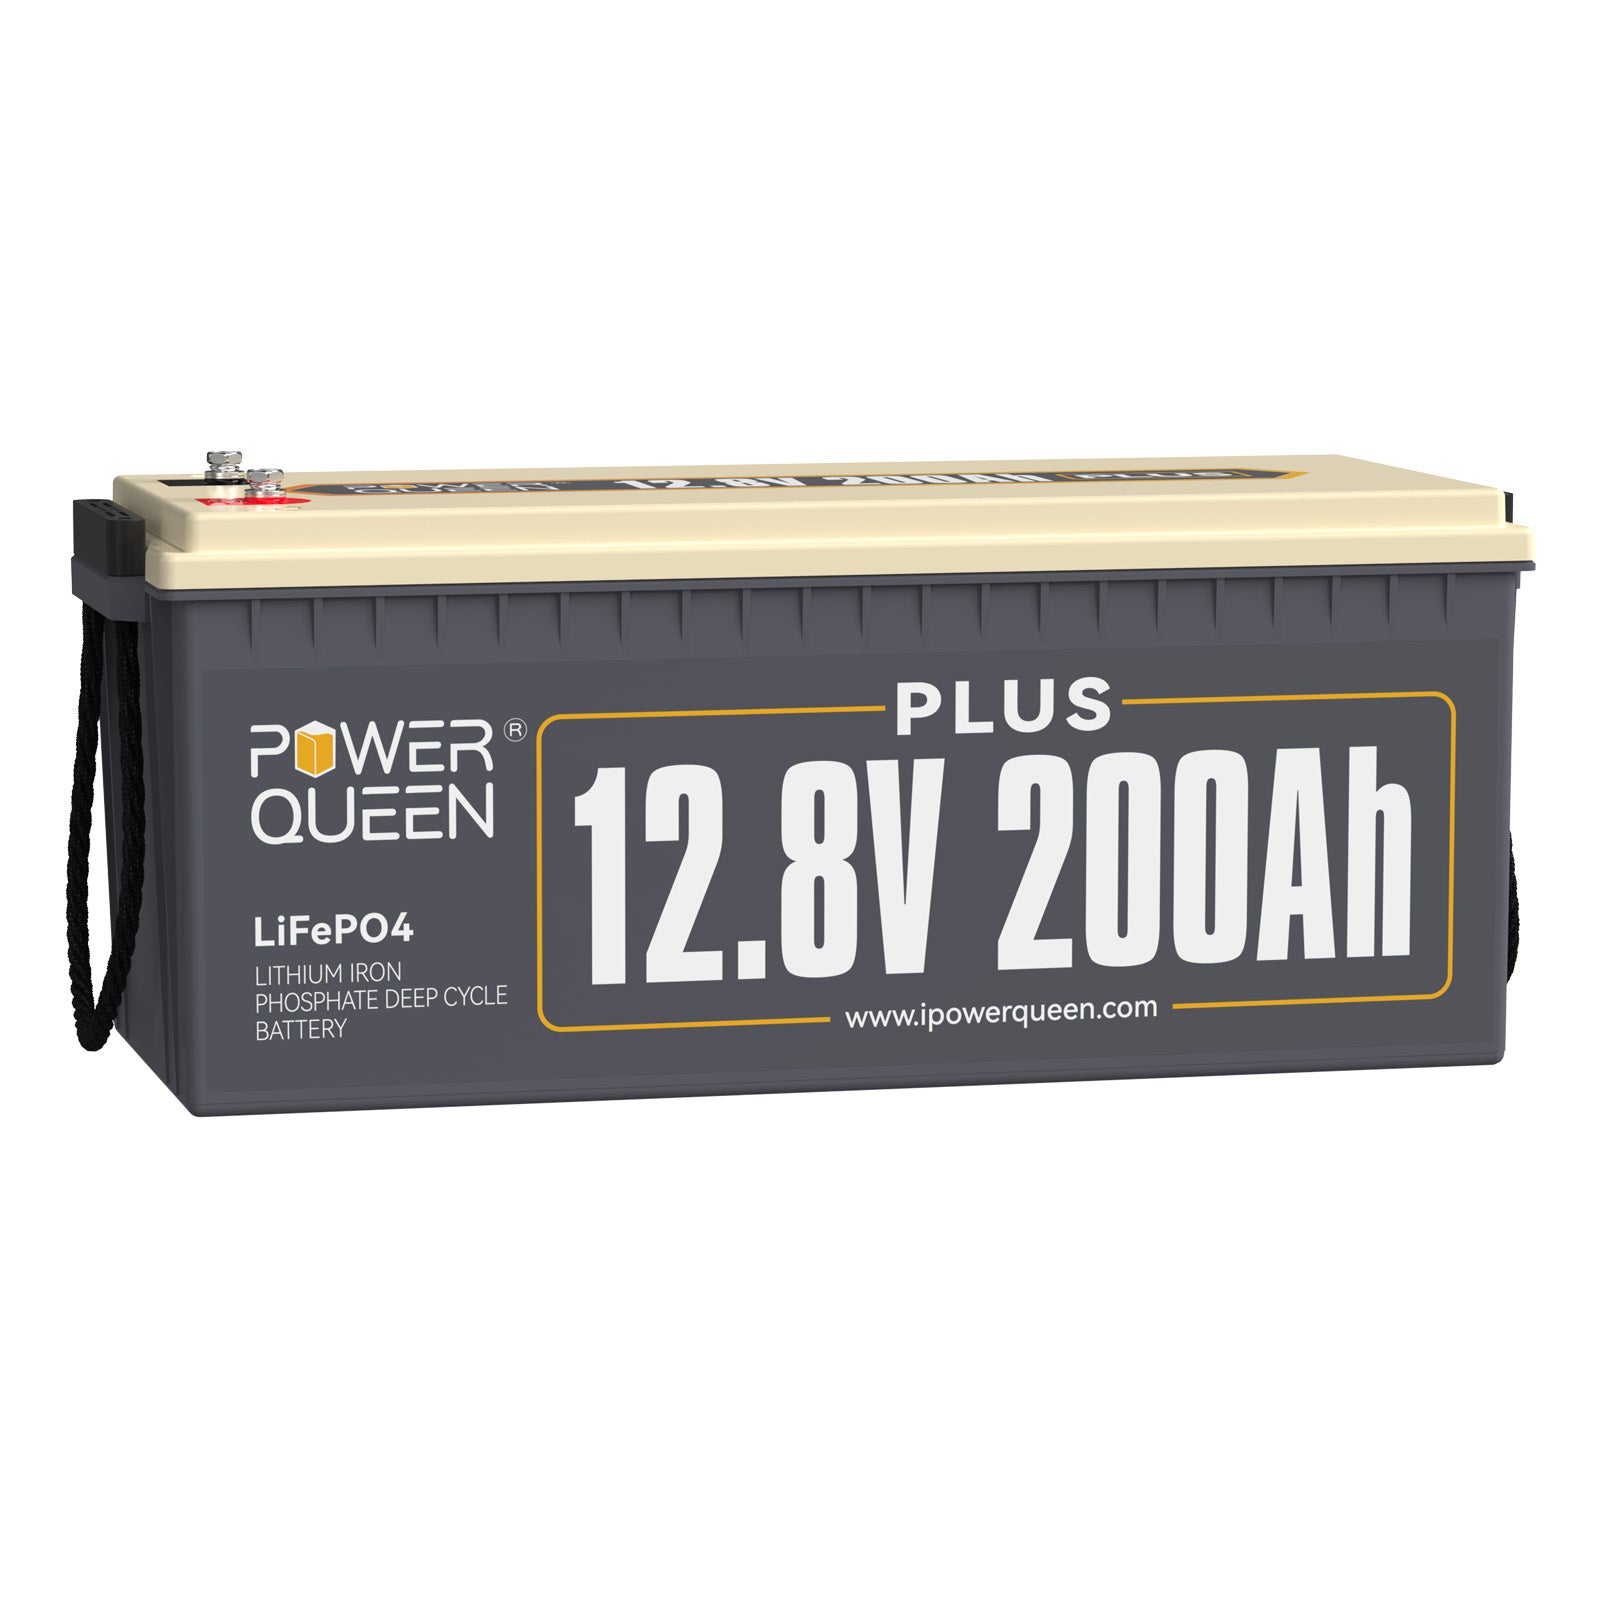 Power Queen 12.8V 200Ah Plus LiFePO4 Battery, Built-in 200A BMS